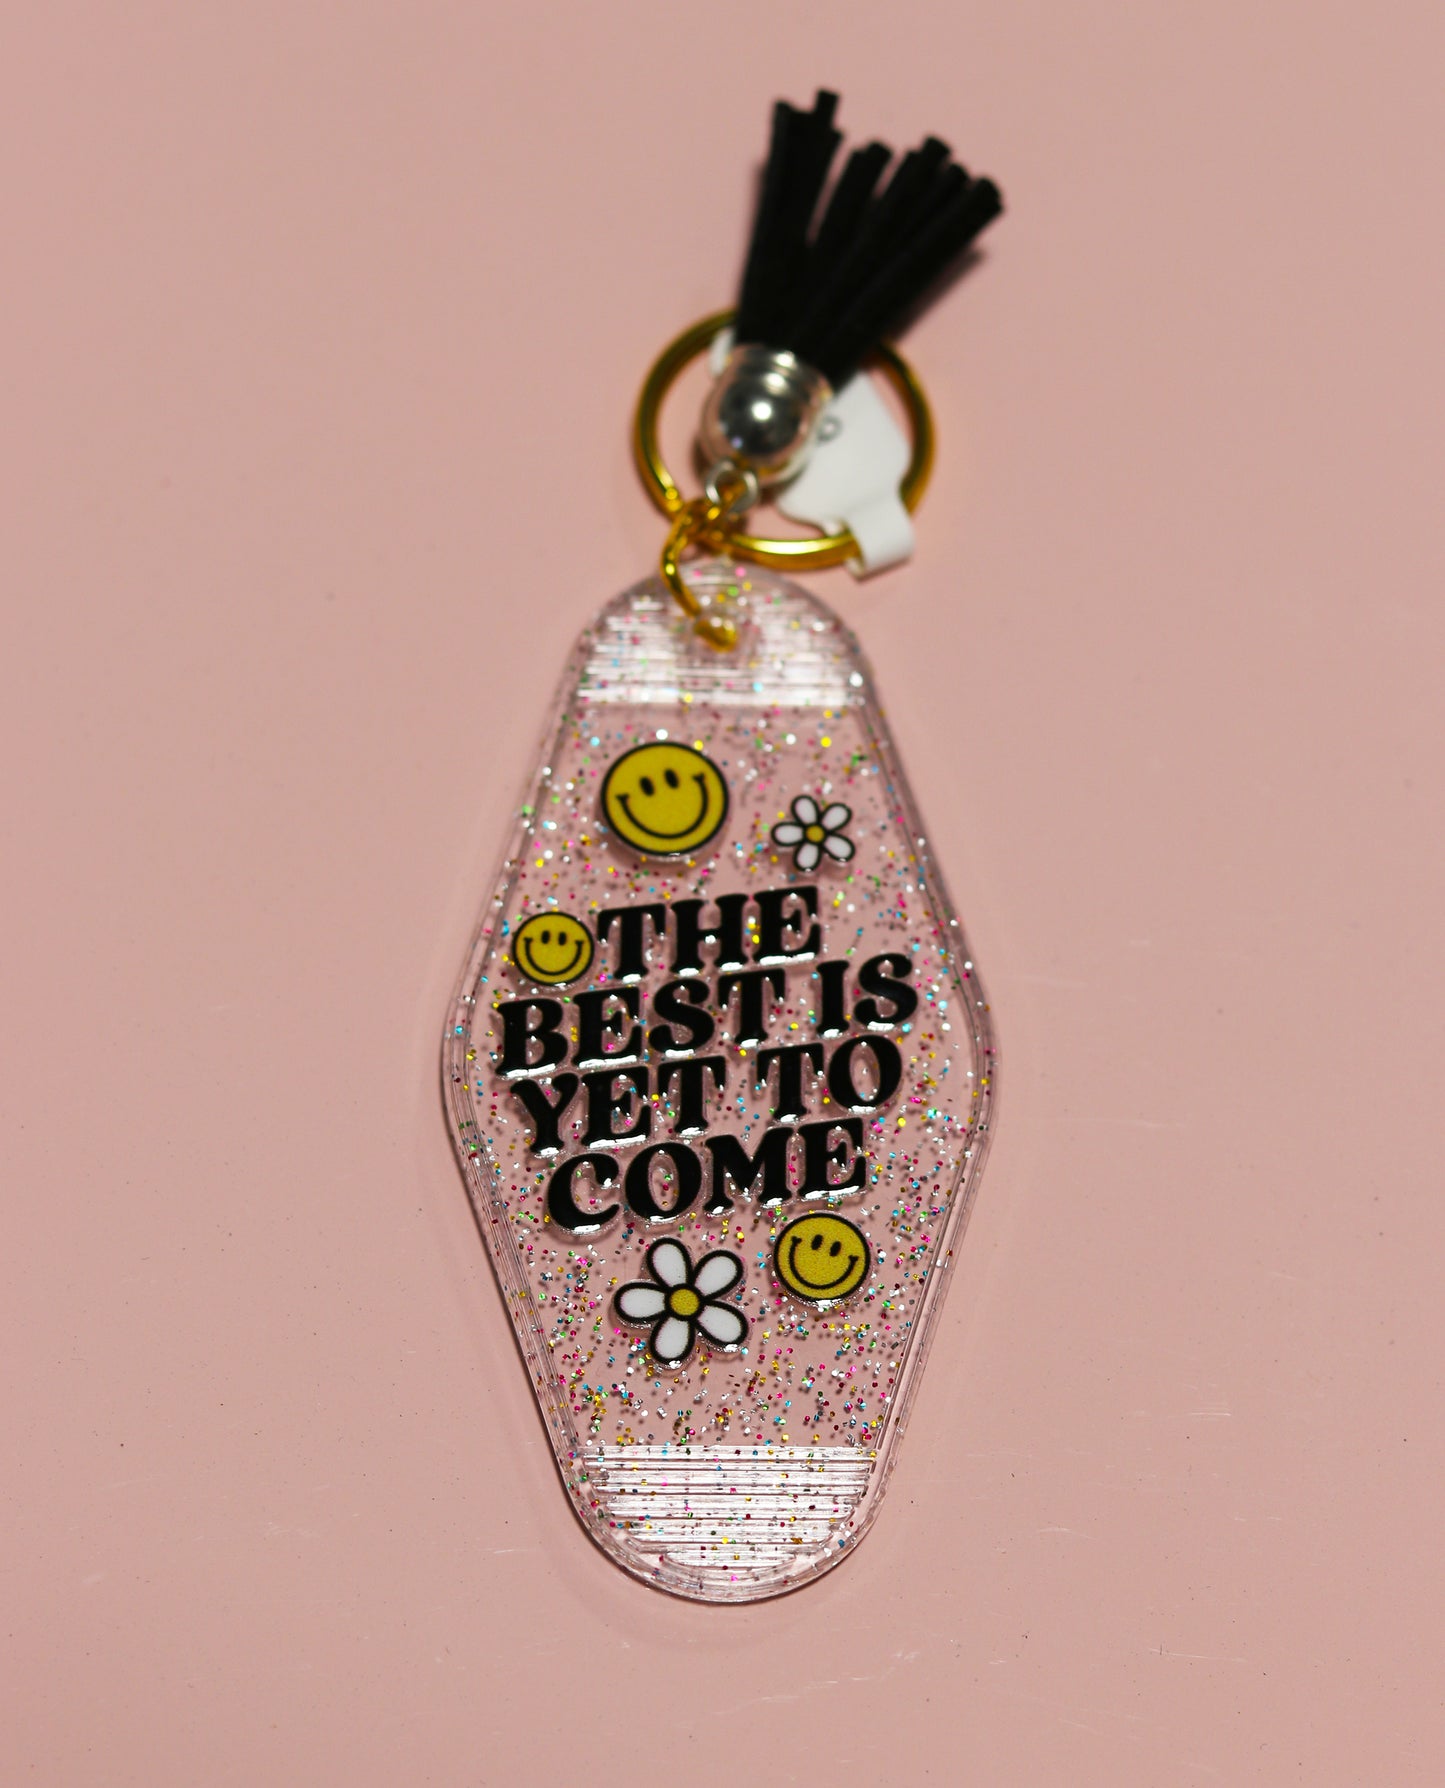 The Best Is Yet To Come Keychain